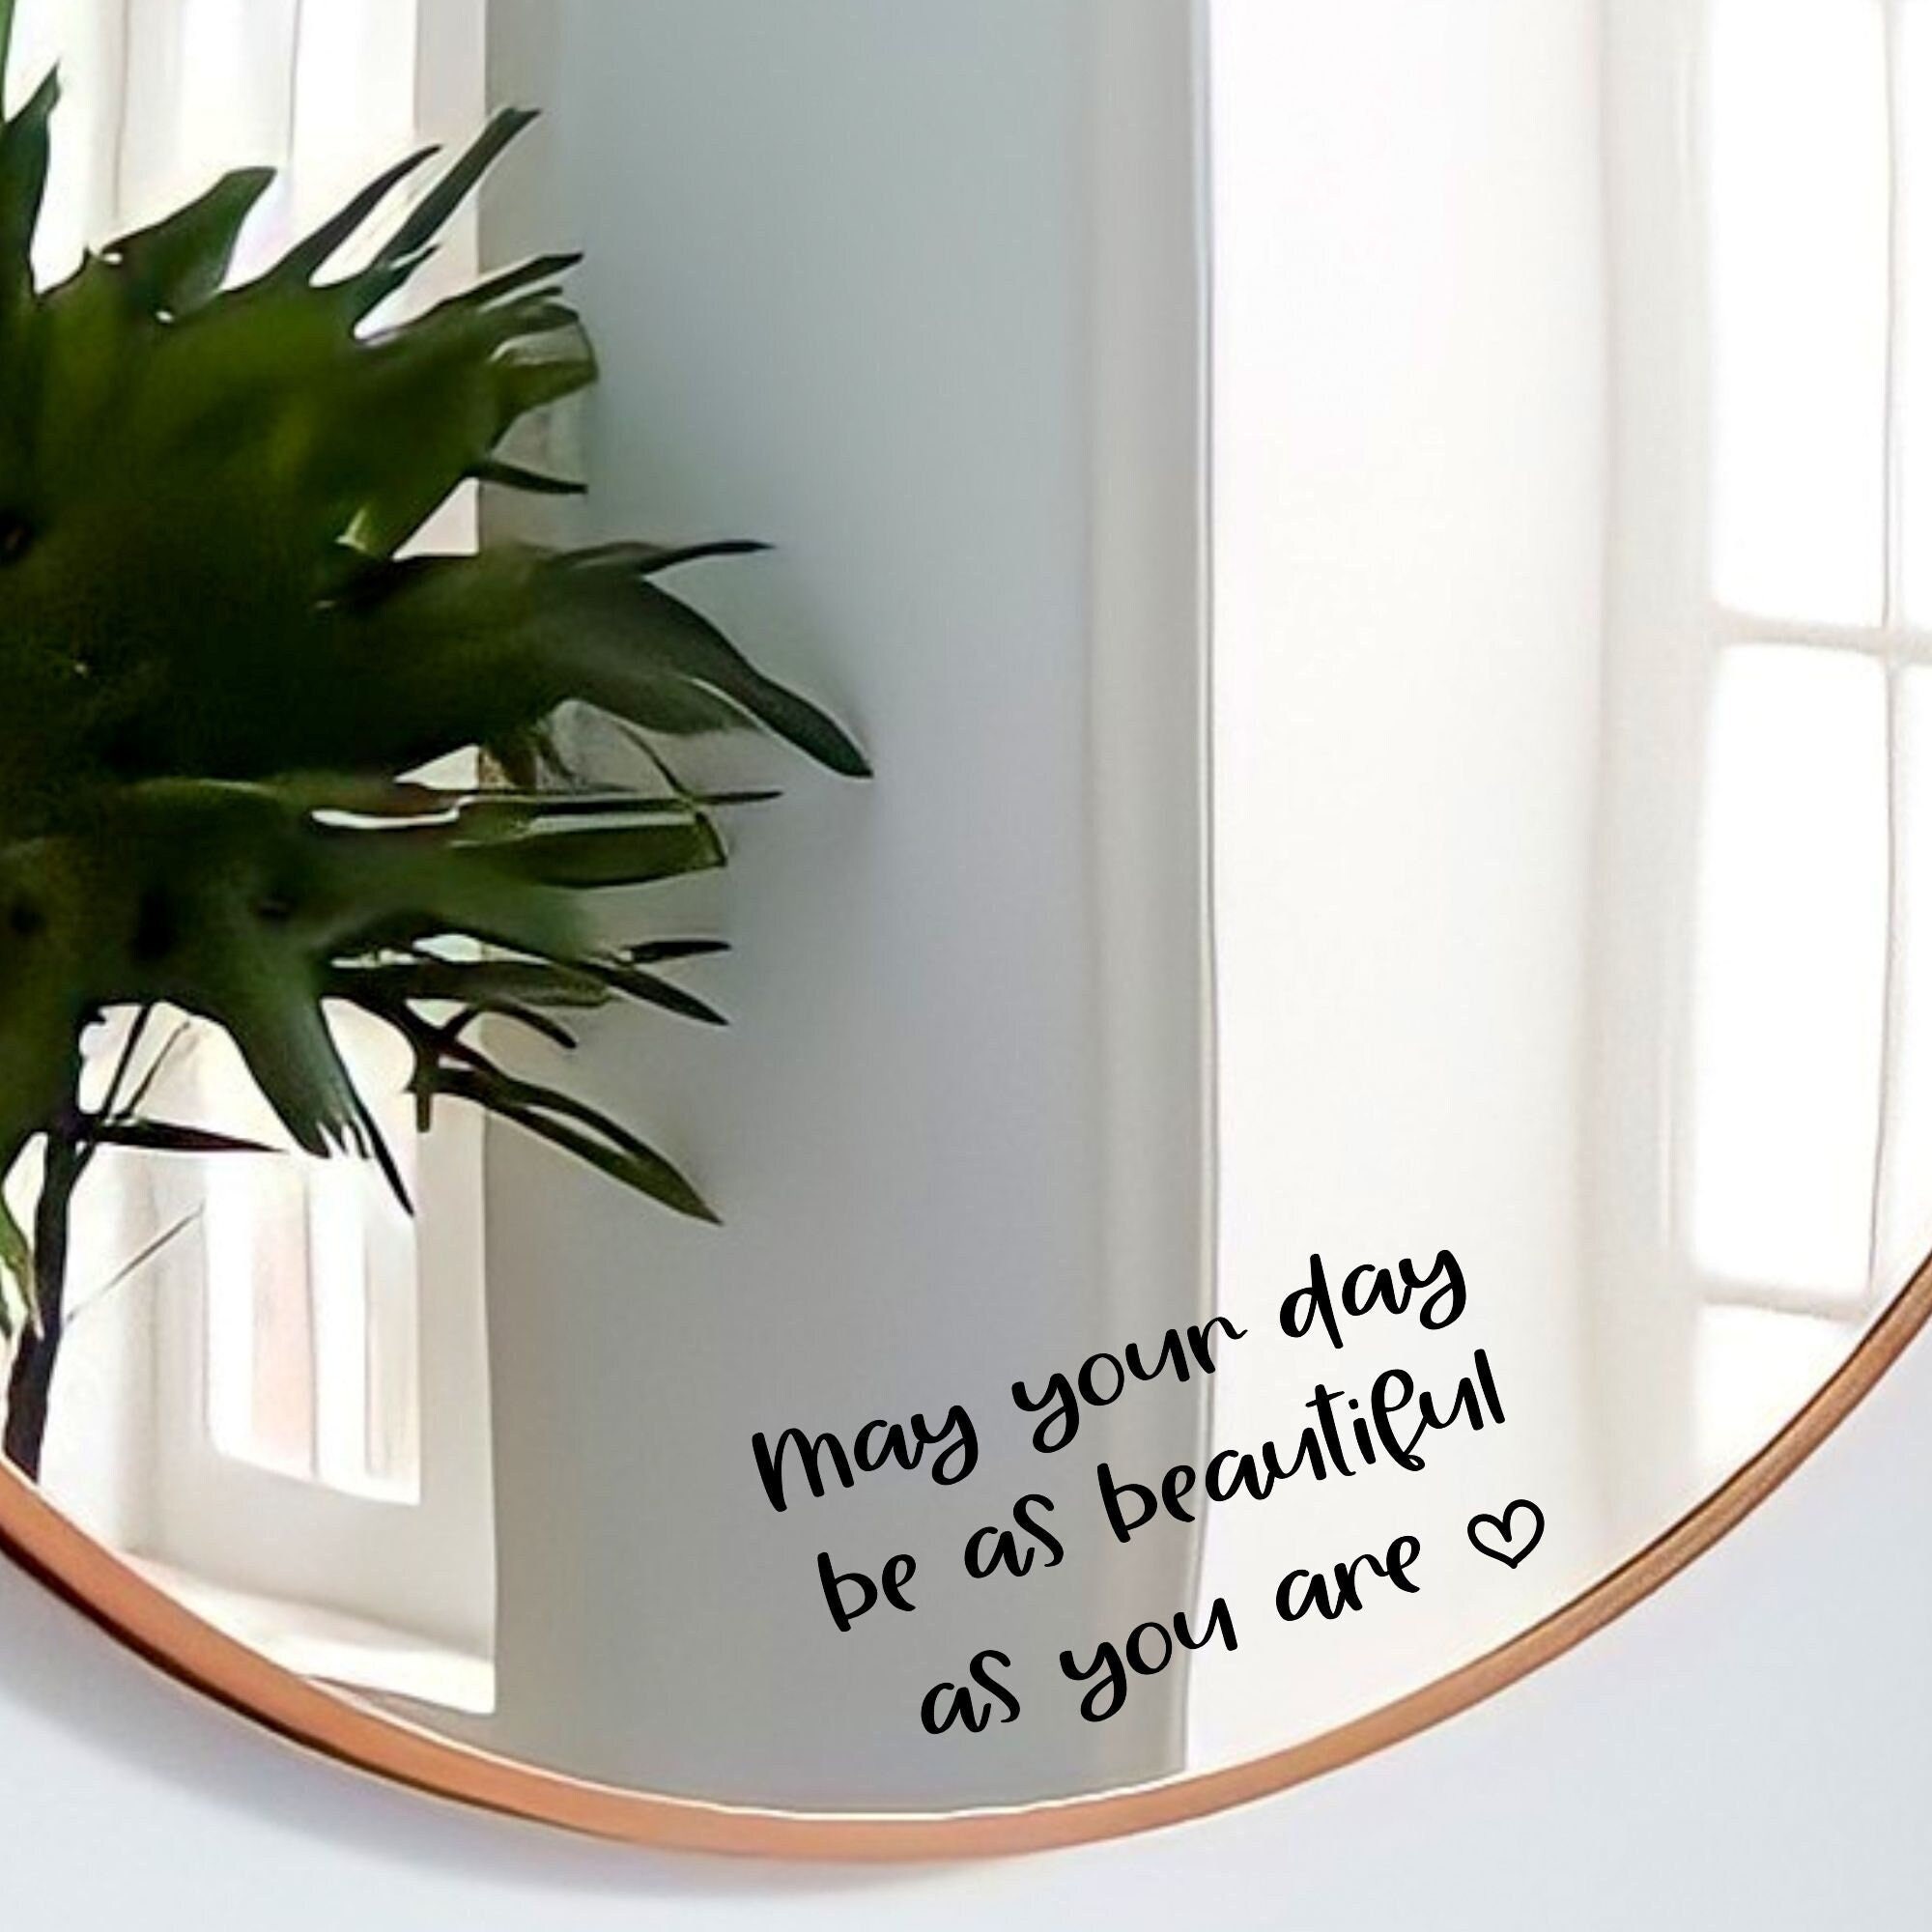 Mirror sticker, mirror decoration, positive message, mantra, vinyl decal,  positive gift, Québec, Canada, Perfectly imperfect!